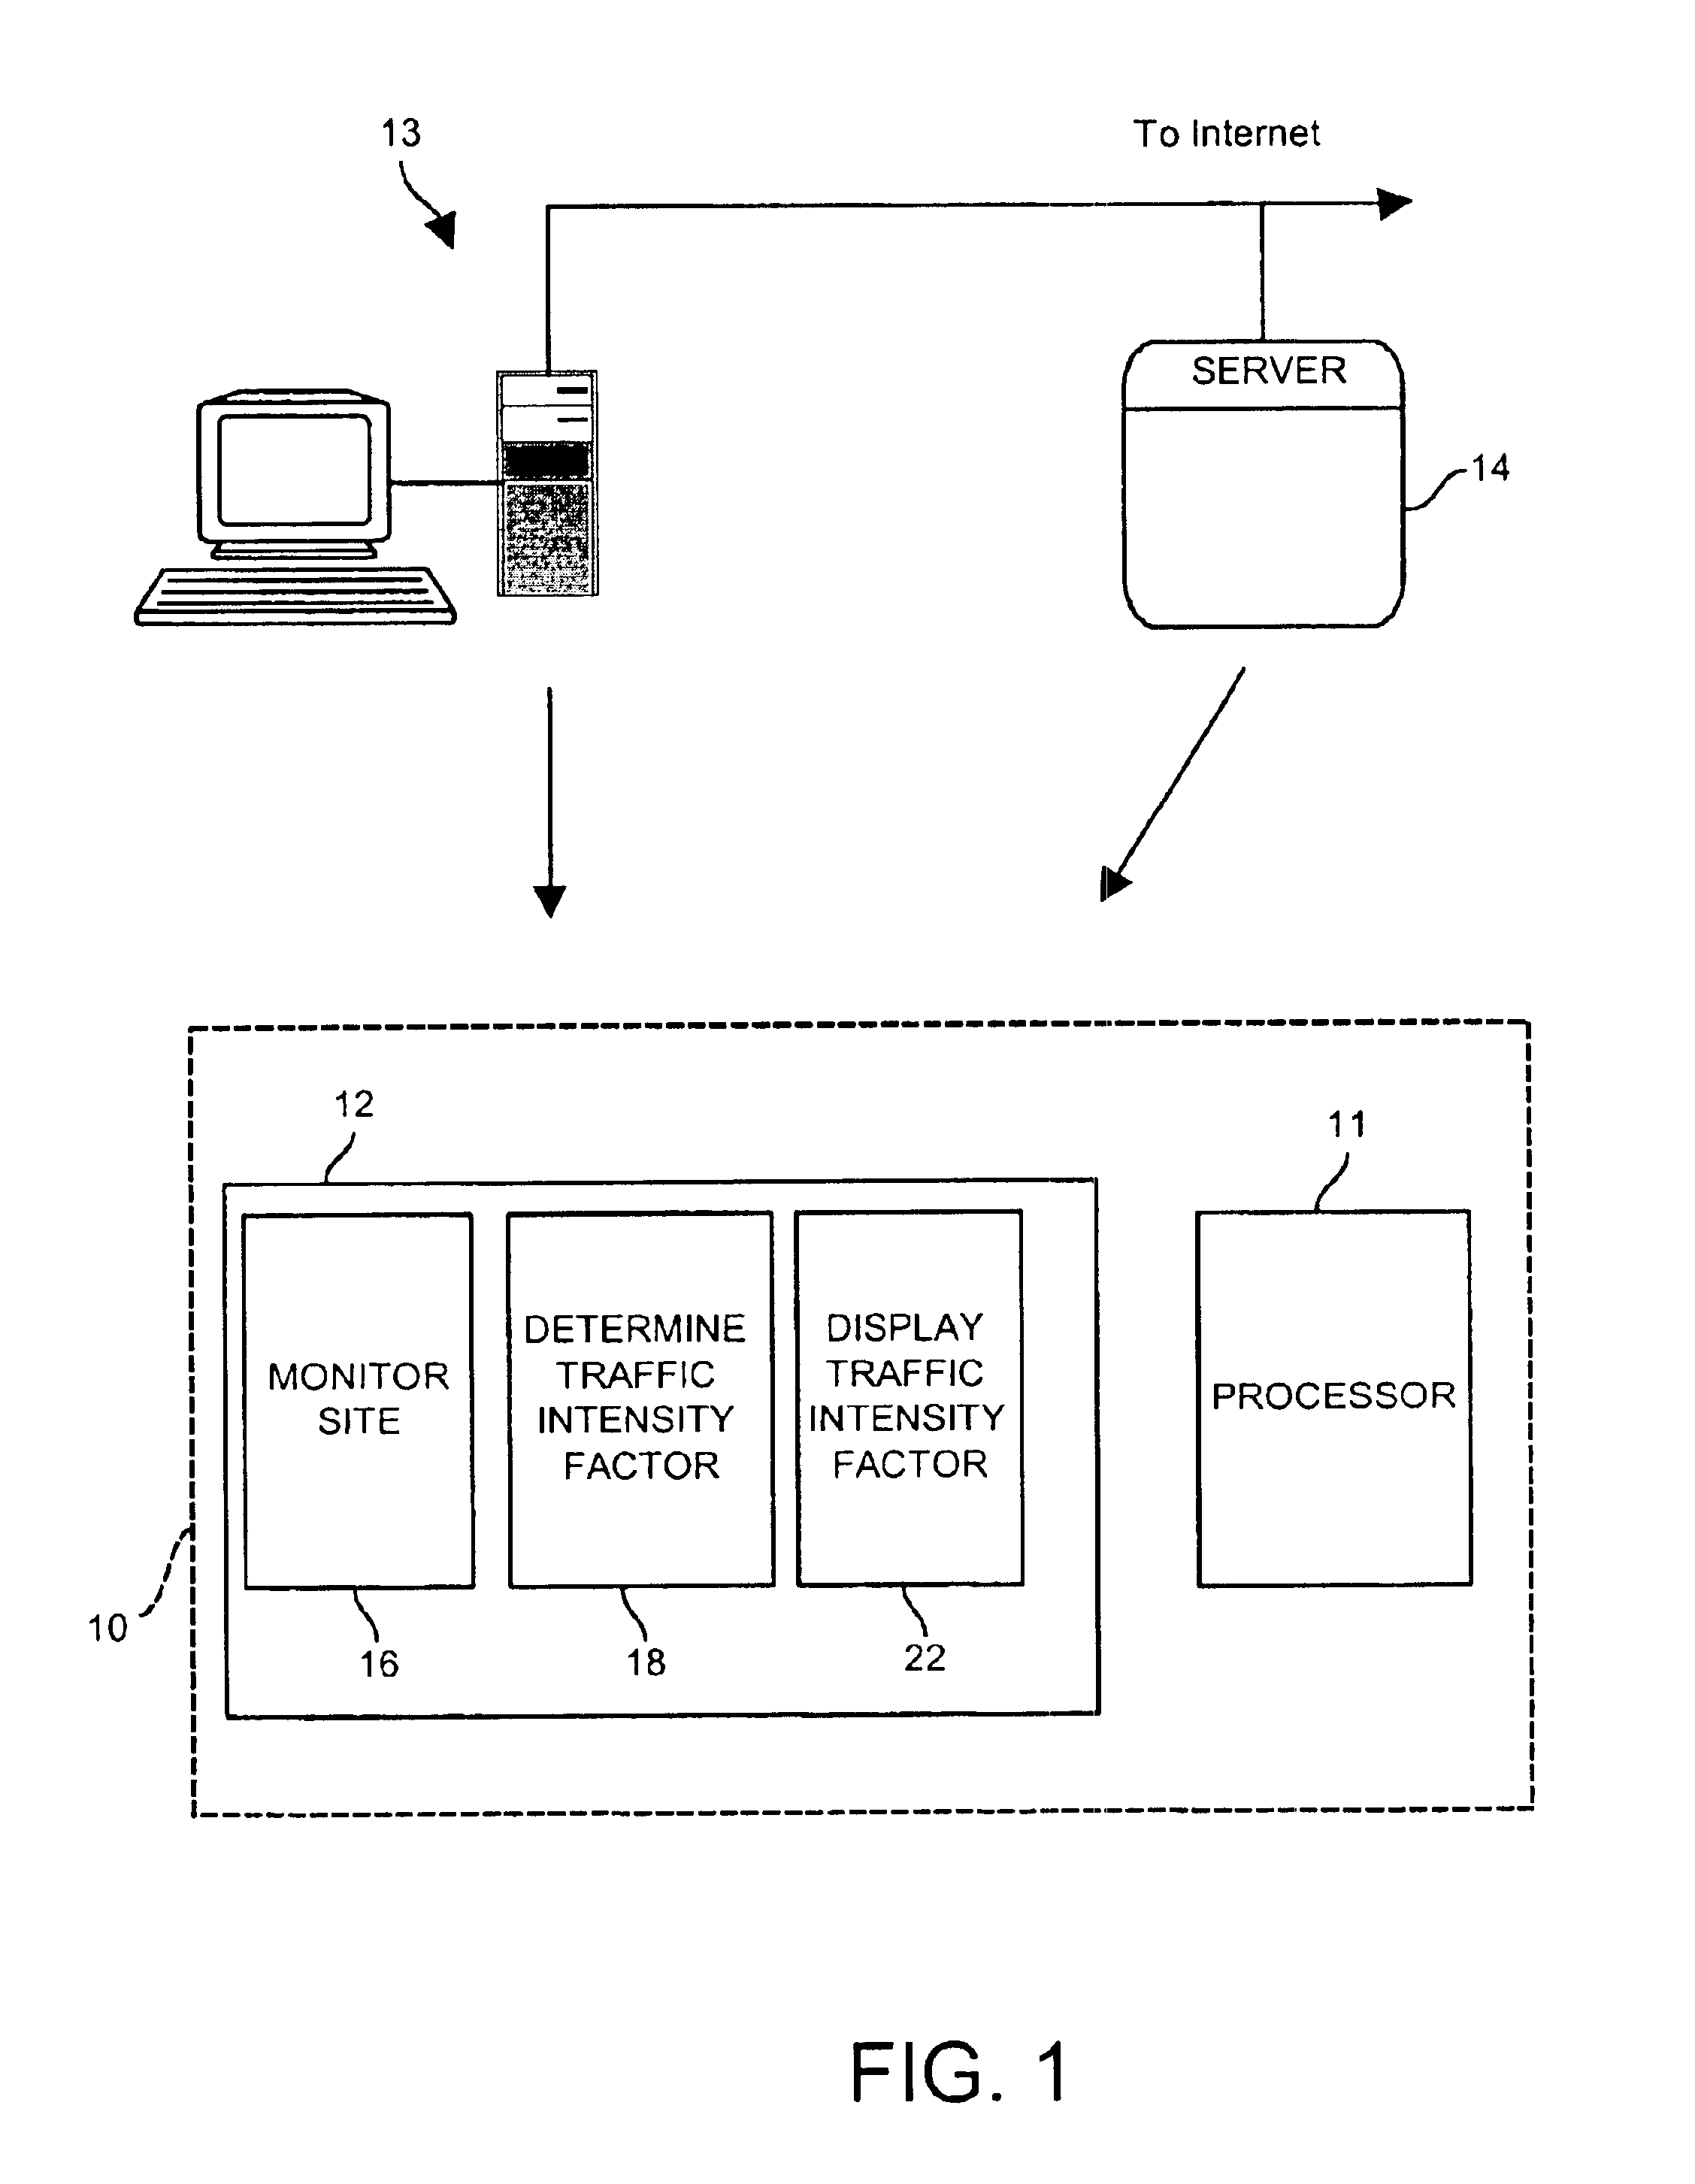 Method for making time-sensitive determinations of traffic intensity for a visitable site